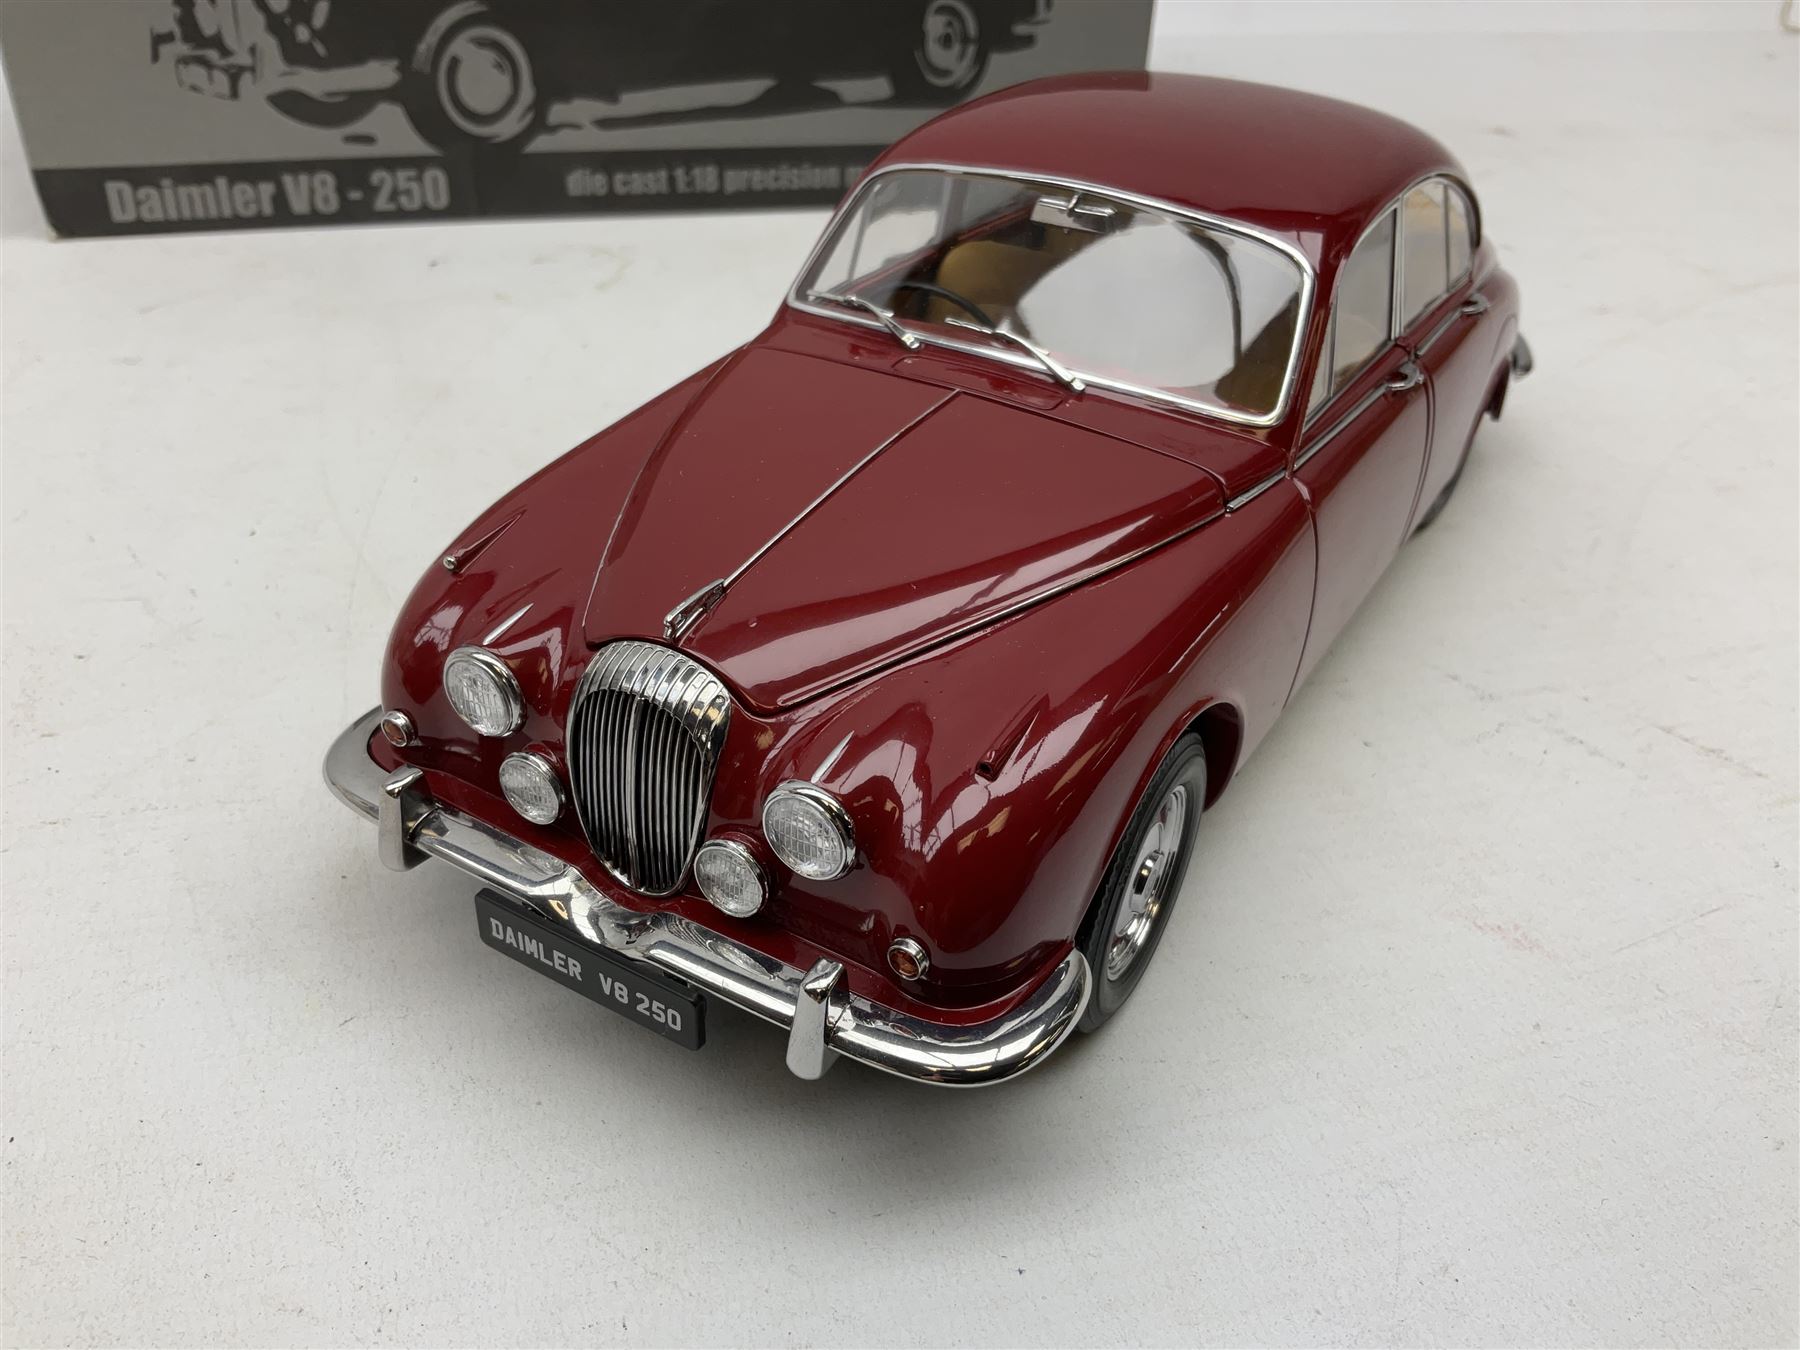 Paragon limited edition 1:18 scale die-cast model of a 1967 Daimler V8-250 - Image 2 of 7